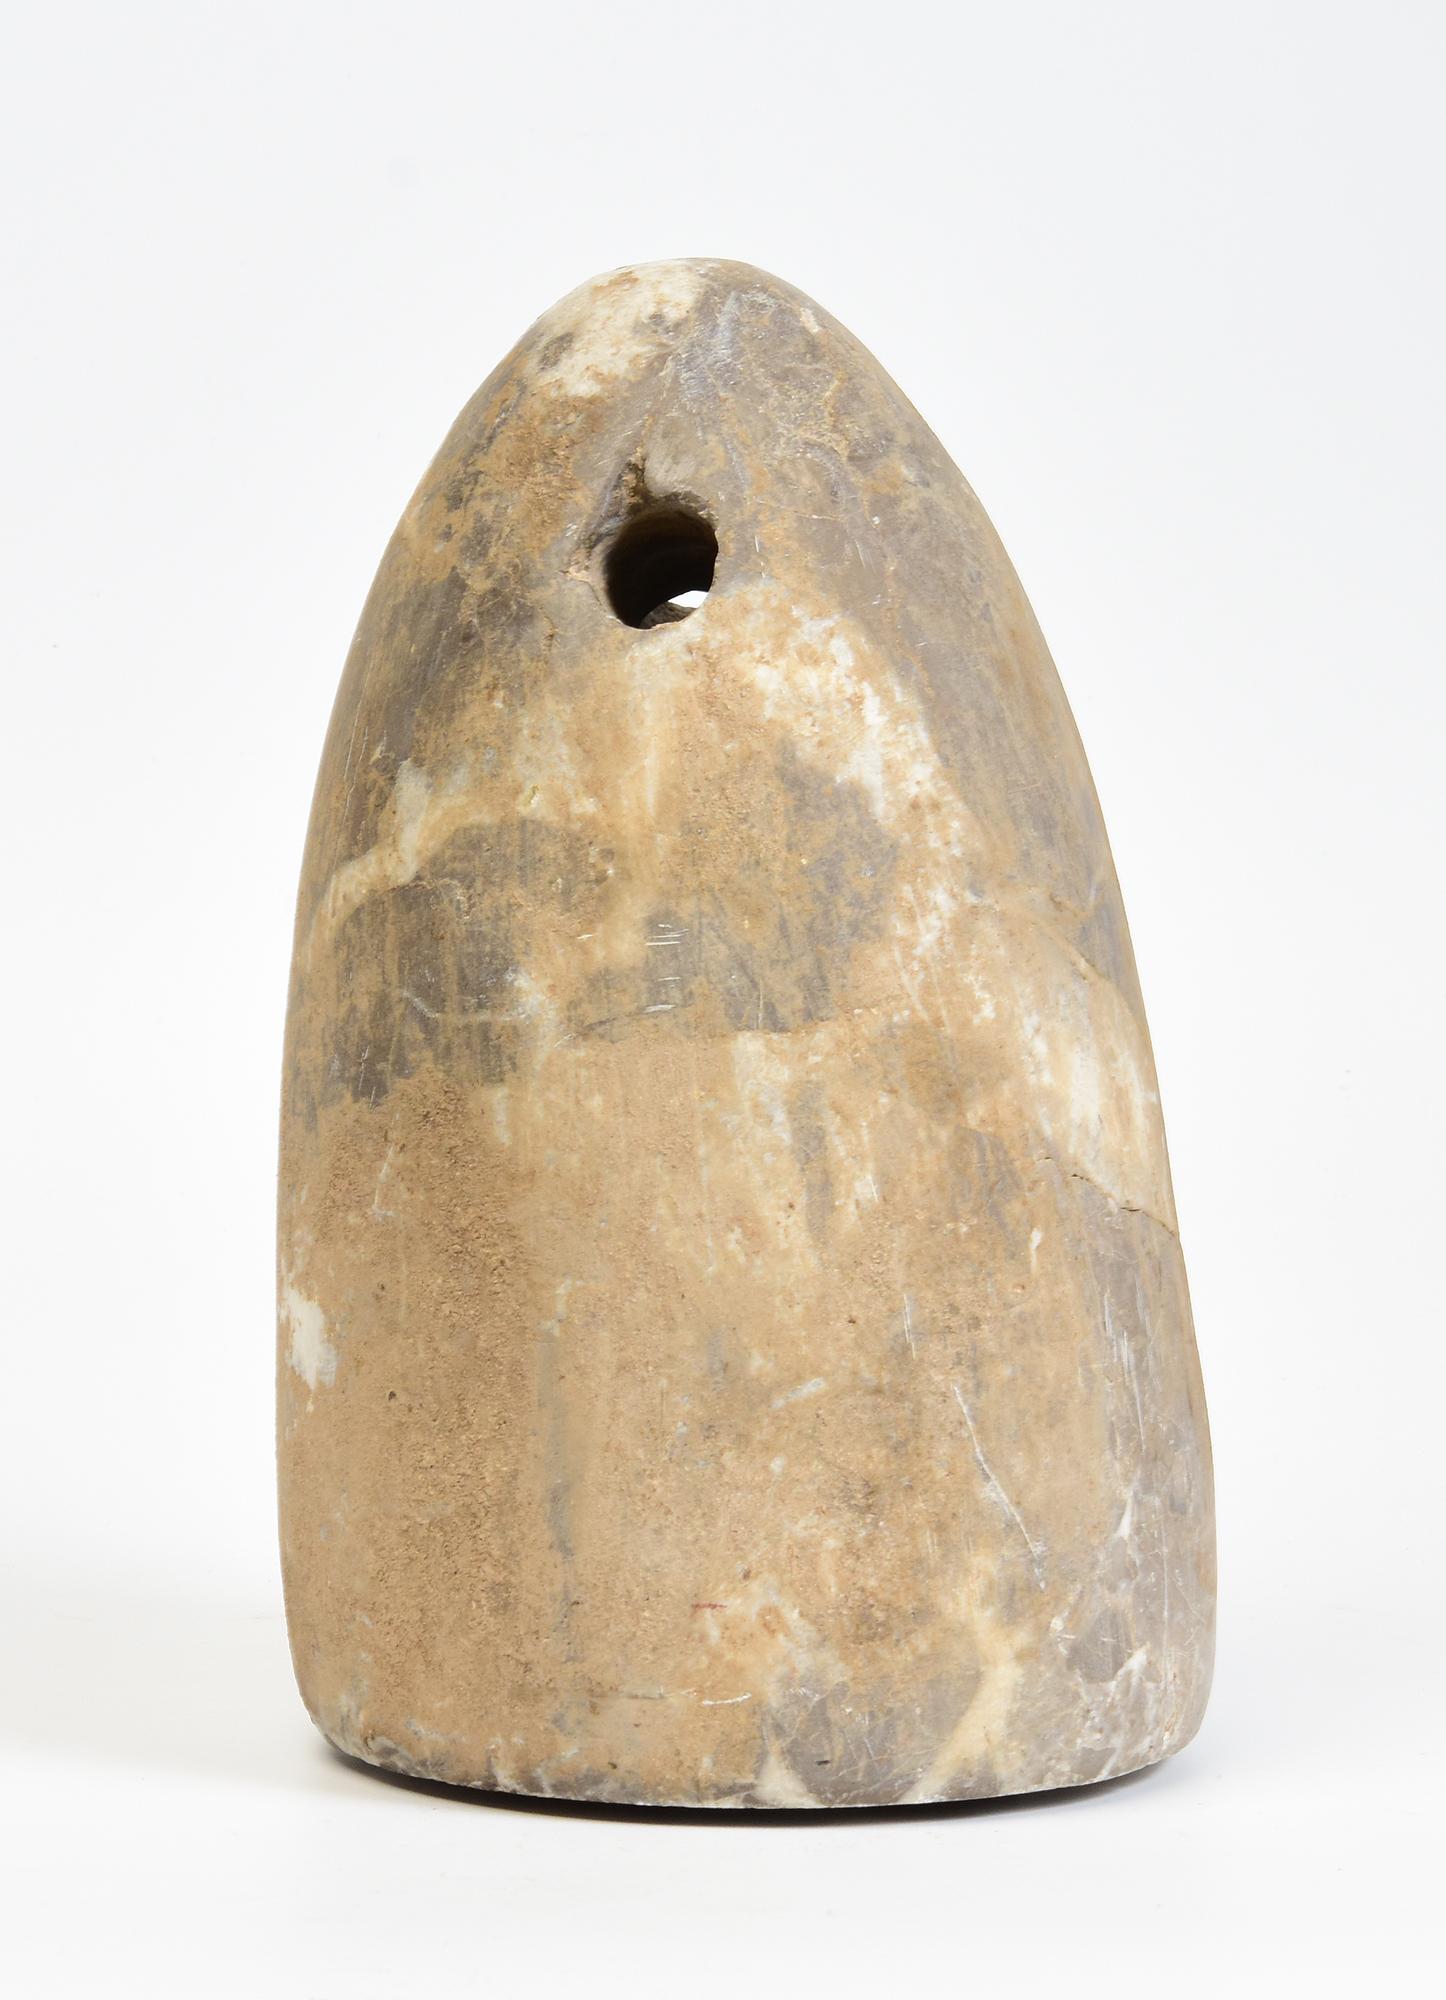 Rare Bactrian hardstone weight with creamy stone color and 2 holes on the top, the base is flat. In the ancient time, the two holes were used to tie up with rope and measure the weight of merchandises.

The Bactria–Margiana Archaeological Complex